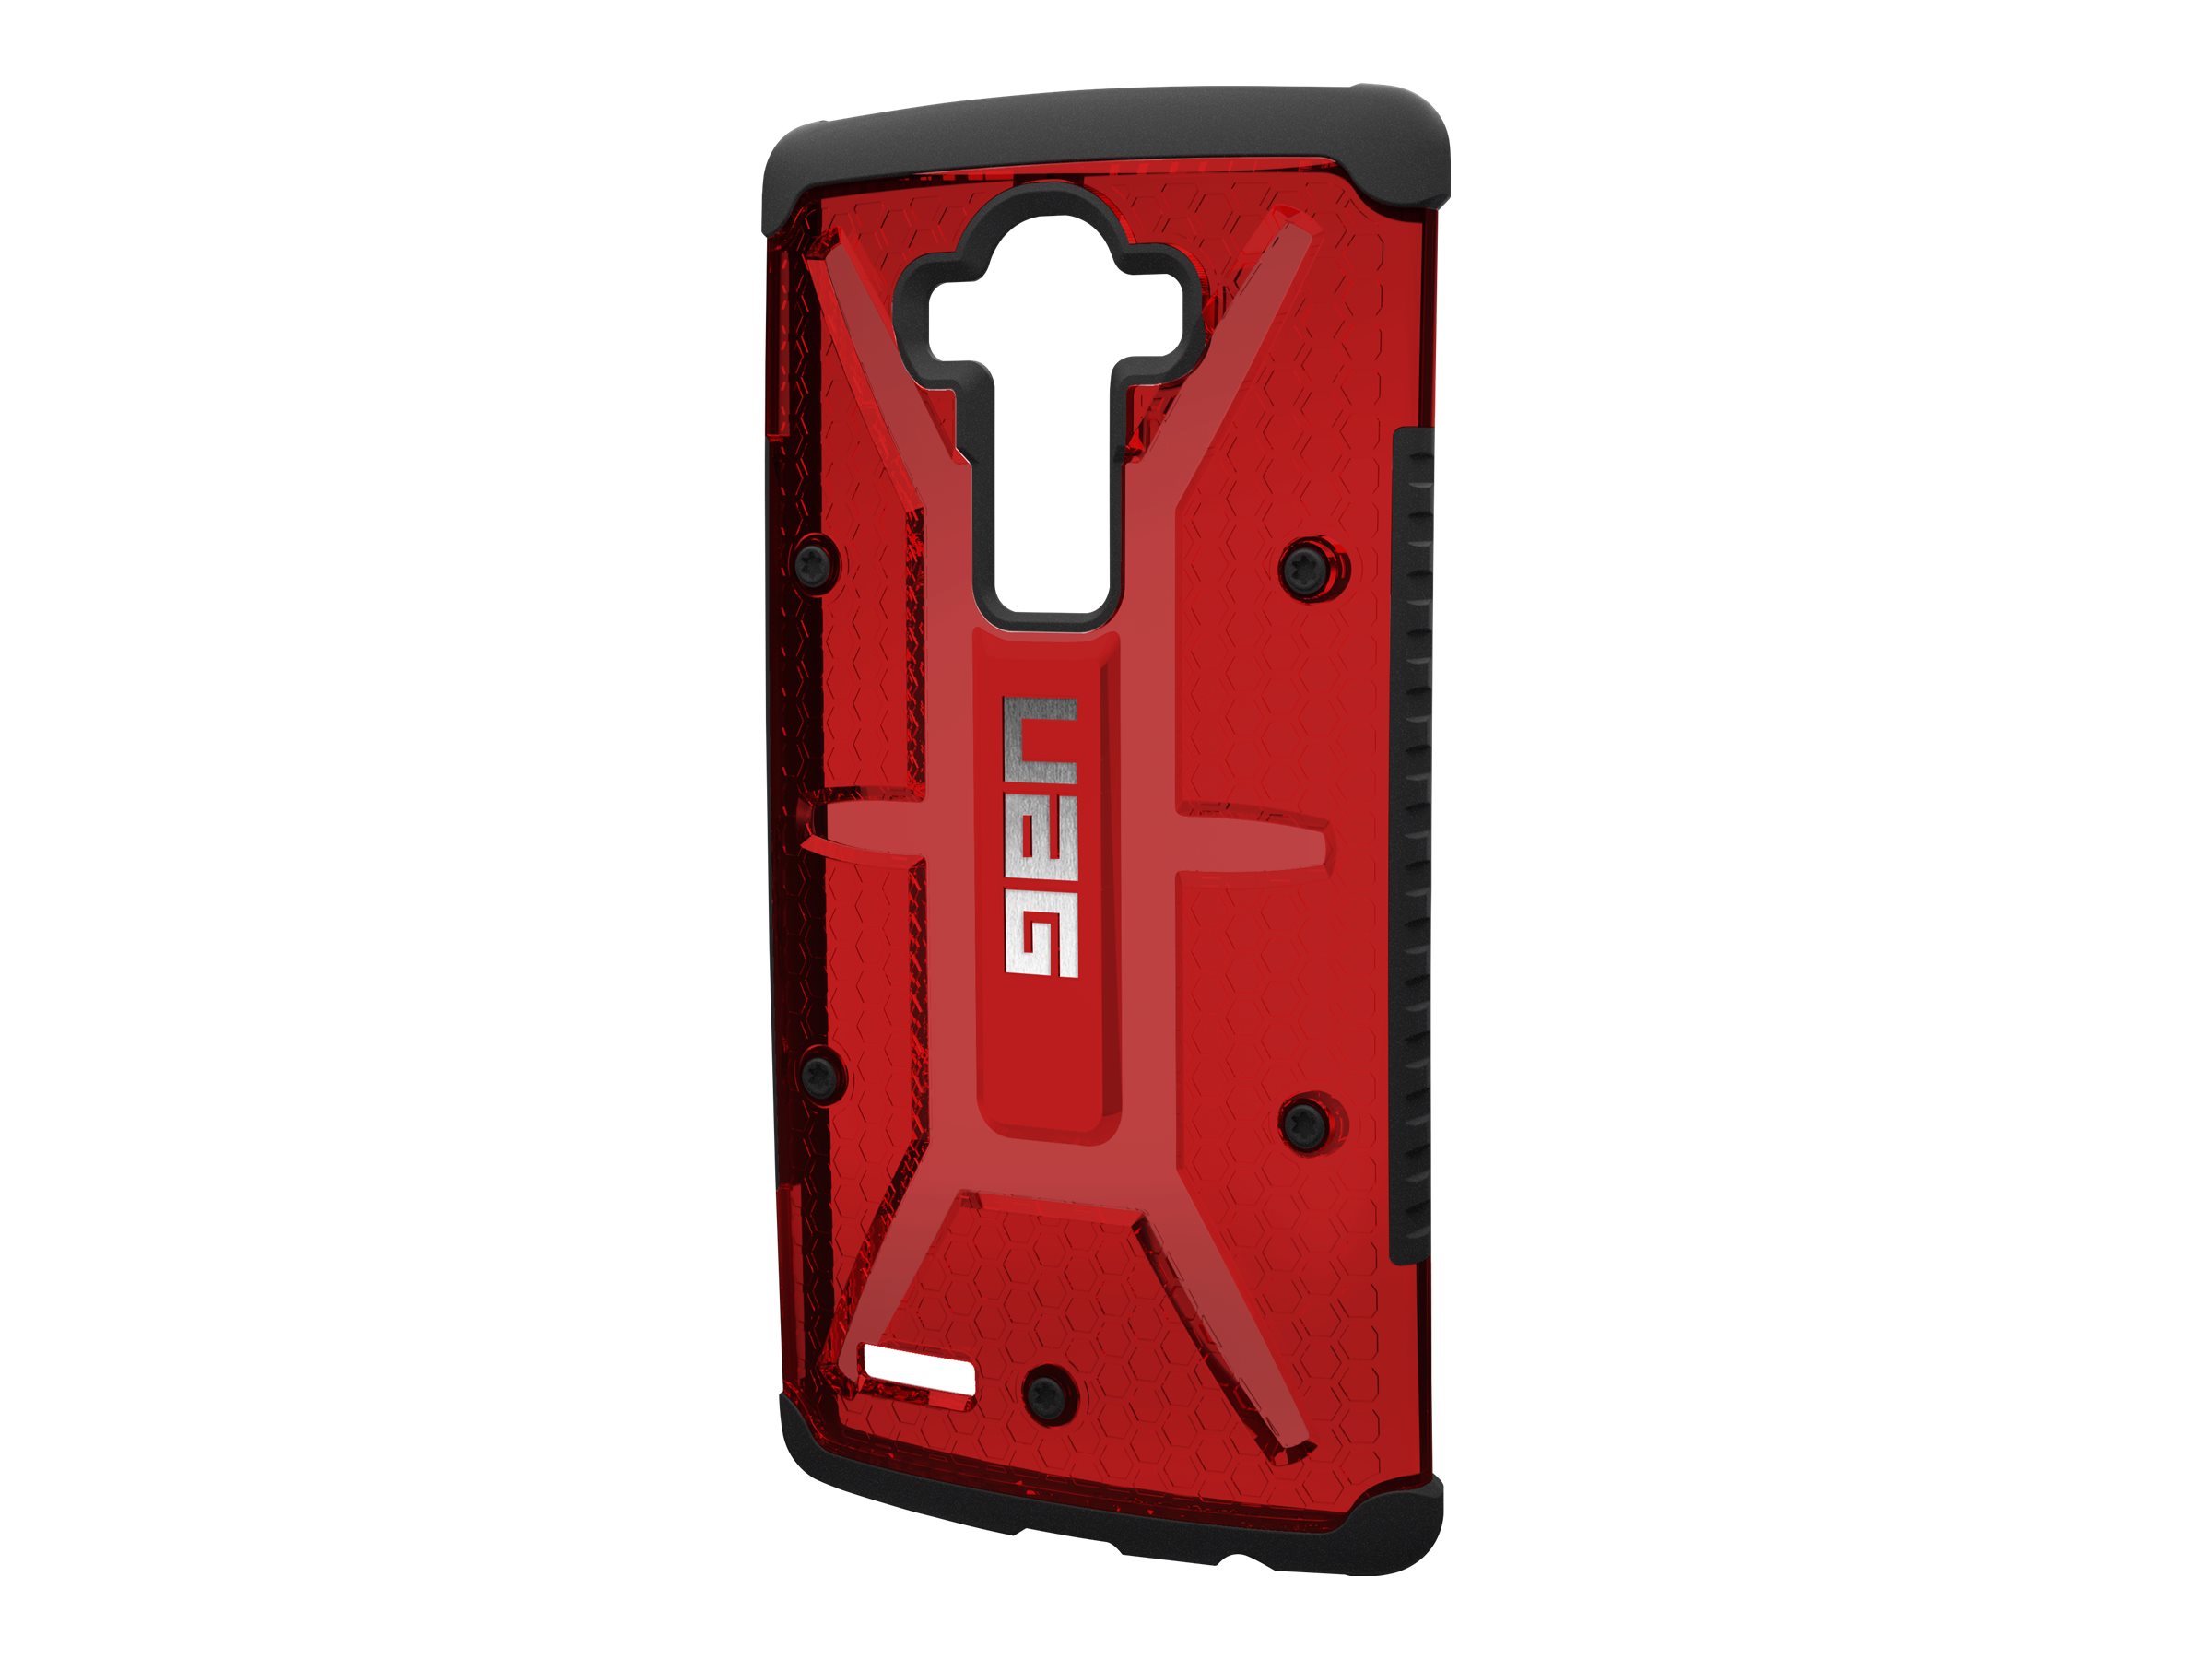 Urban Armor Gear Magma Case for LG G4 - image 4 of 5